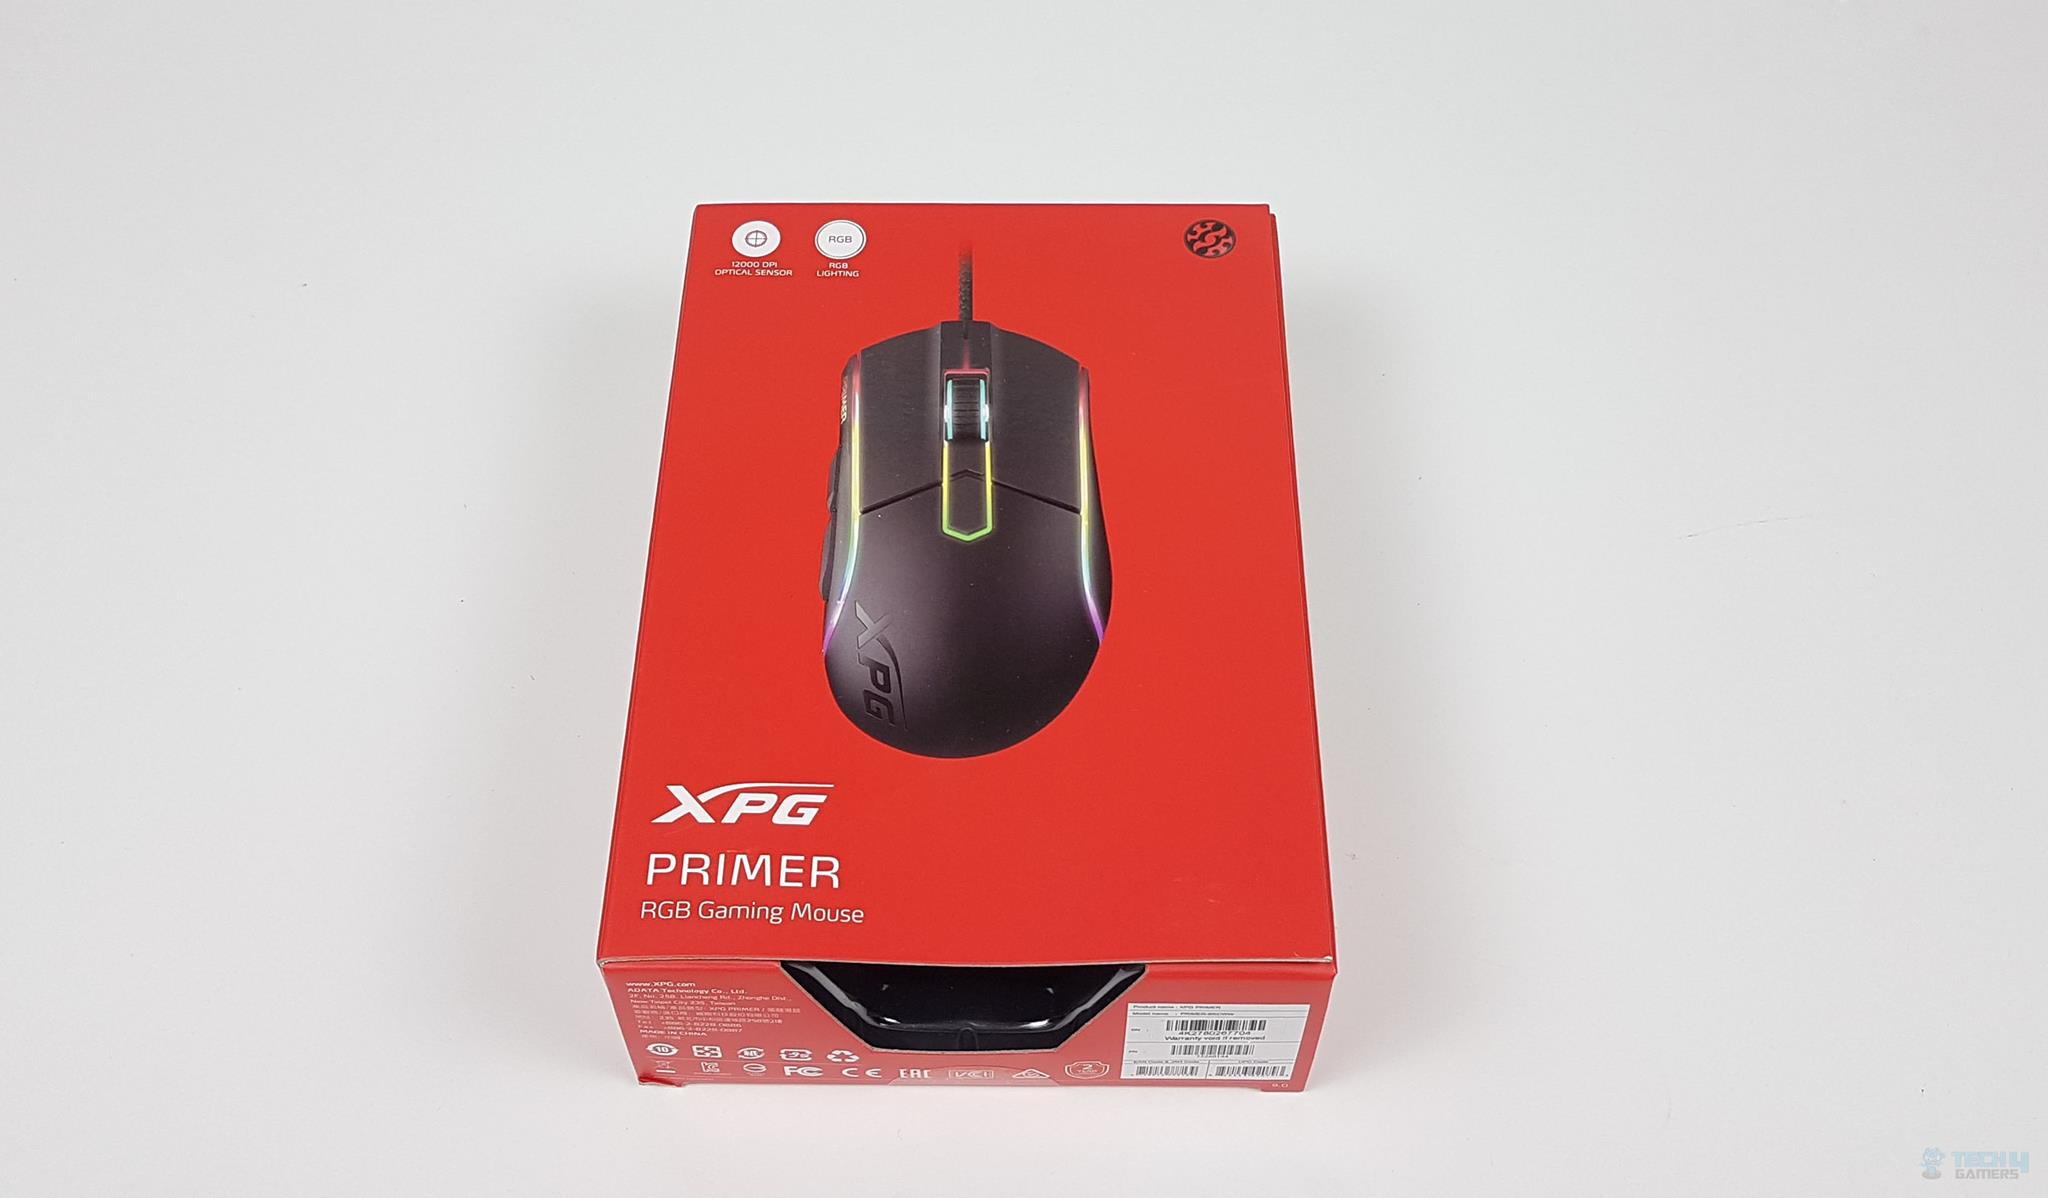 PBT Mouse Packaging and Unboxing